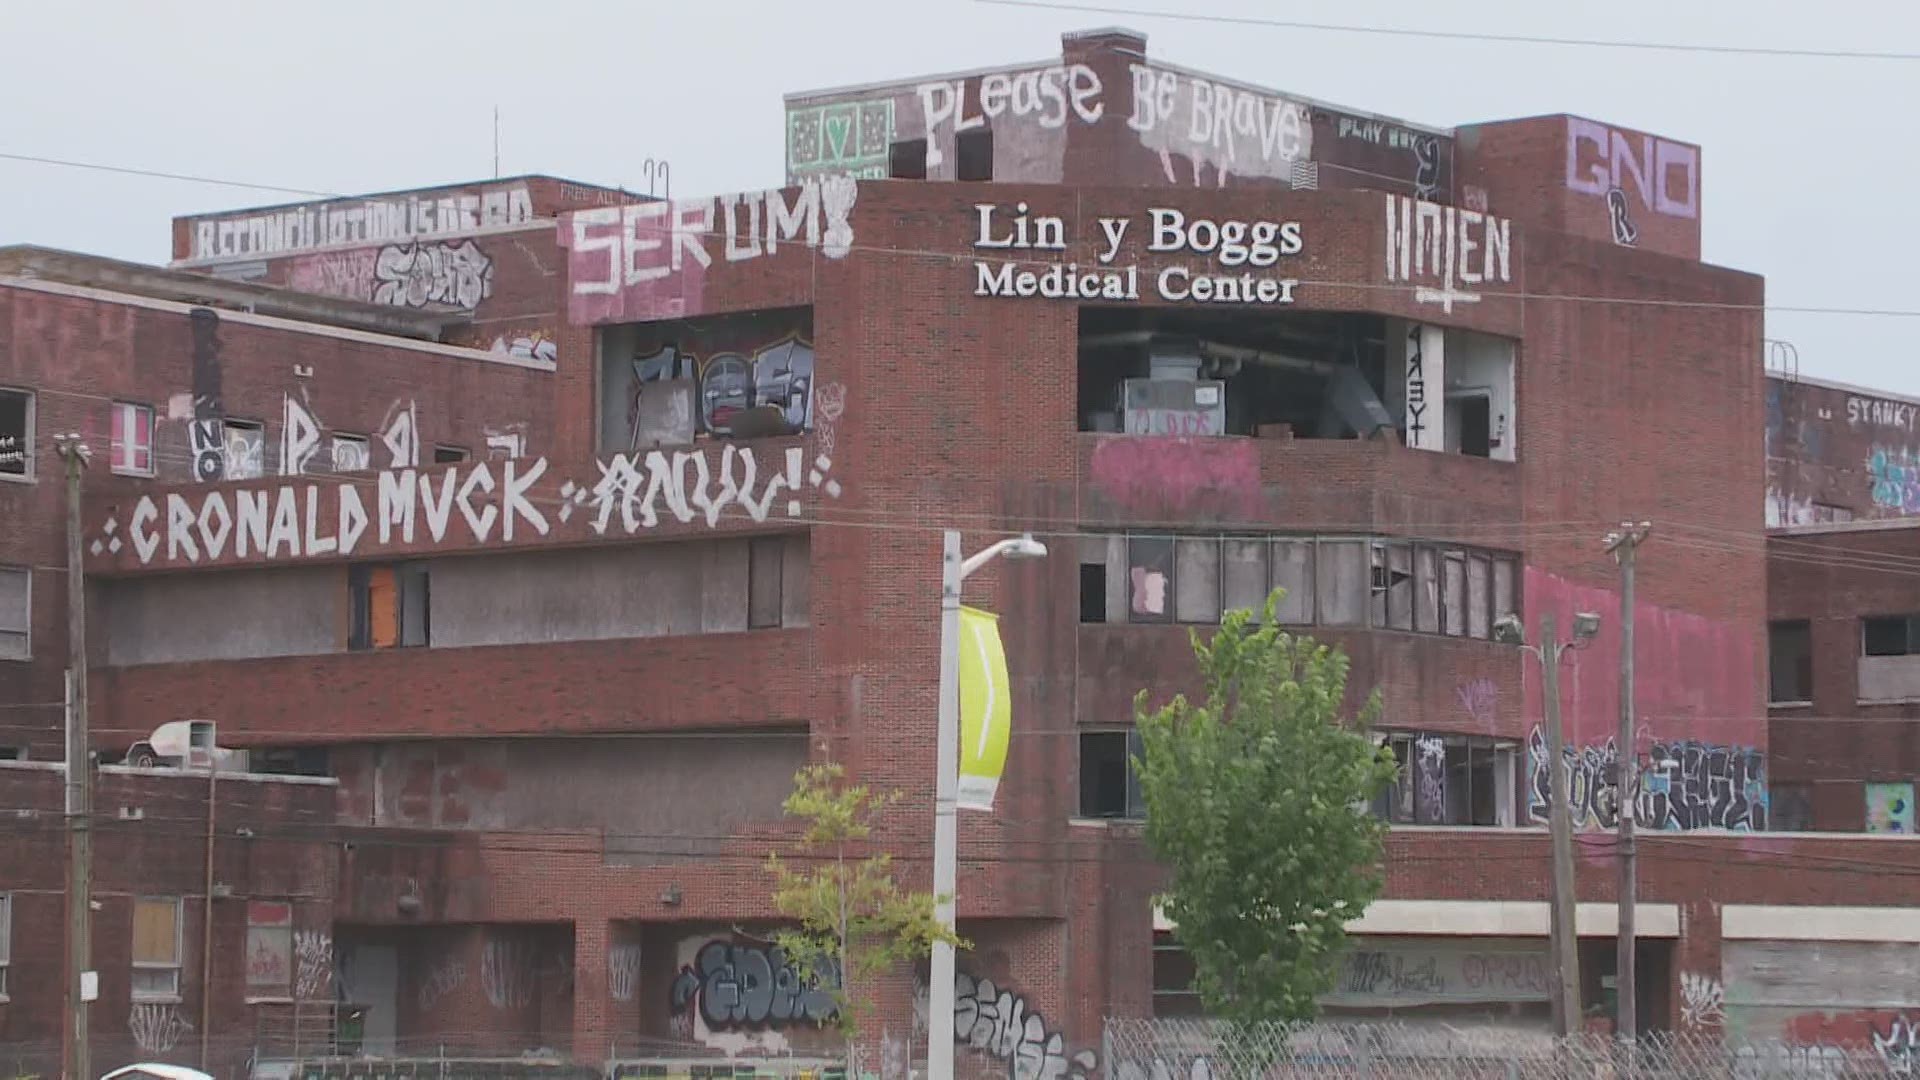 The Lindy Boggs Medical Center has been blighted since Hurricane Katrina but now there is a new owner and they have a plan for its return.